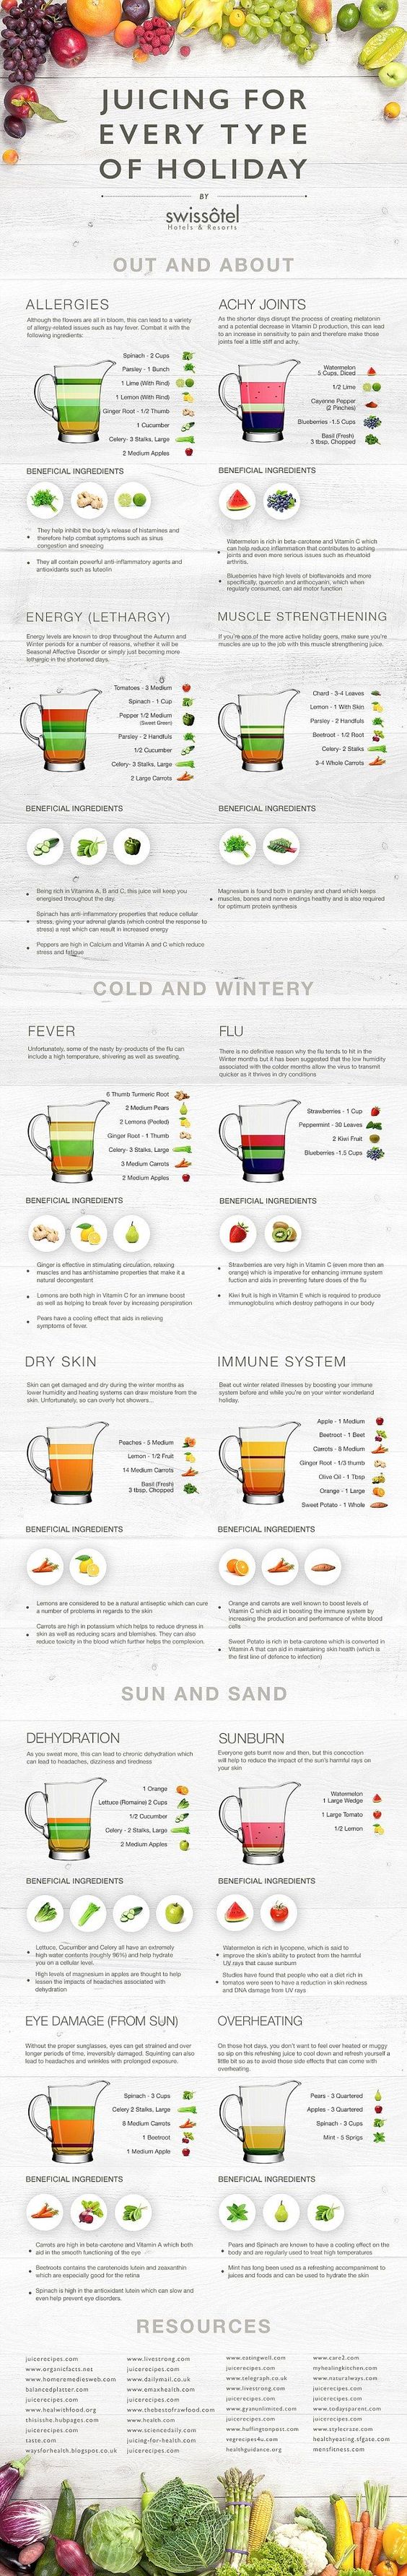 Juicing fruits and vegetables can help you stay healthy